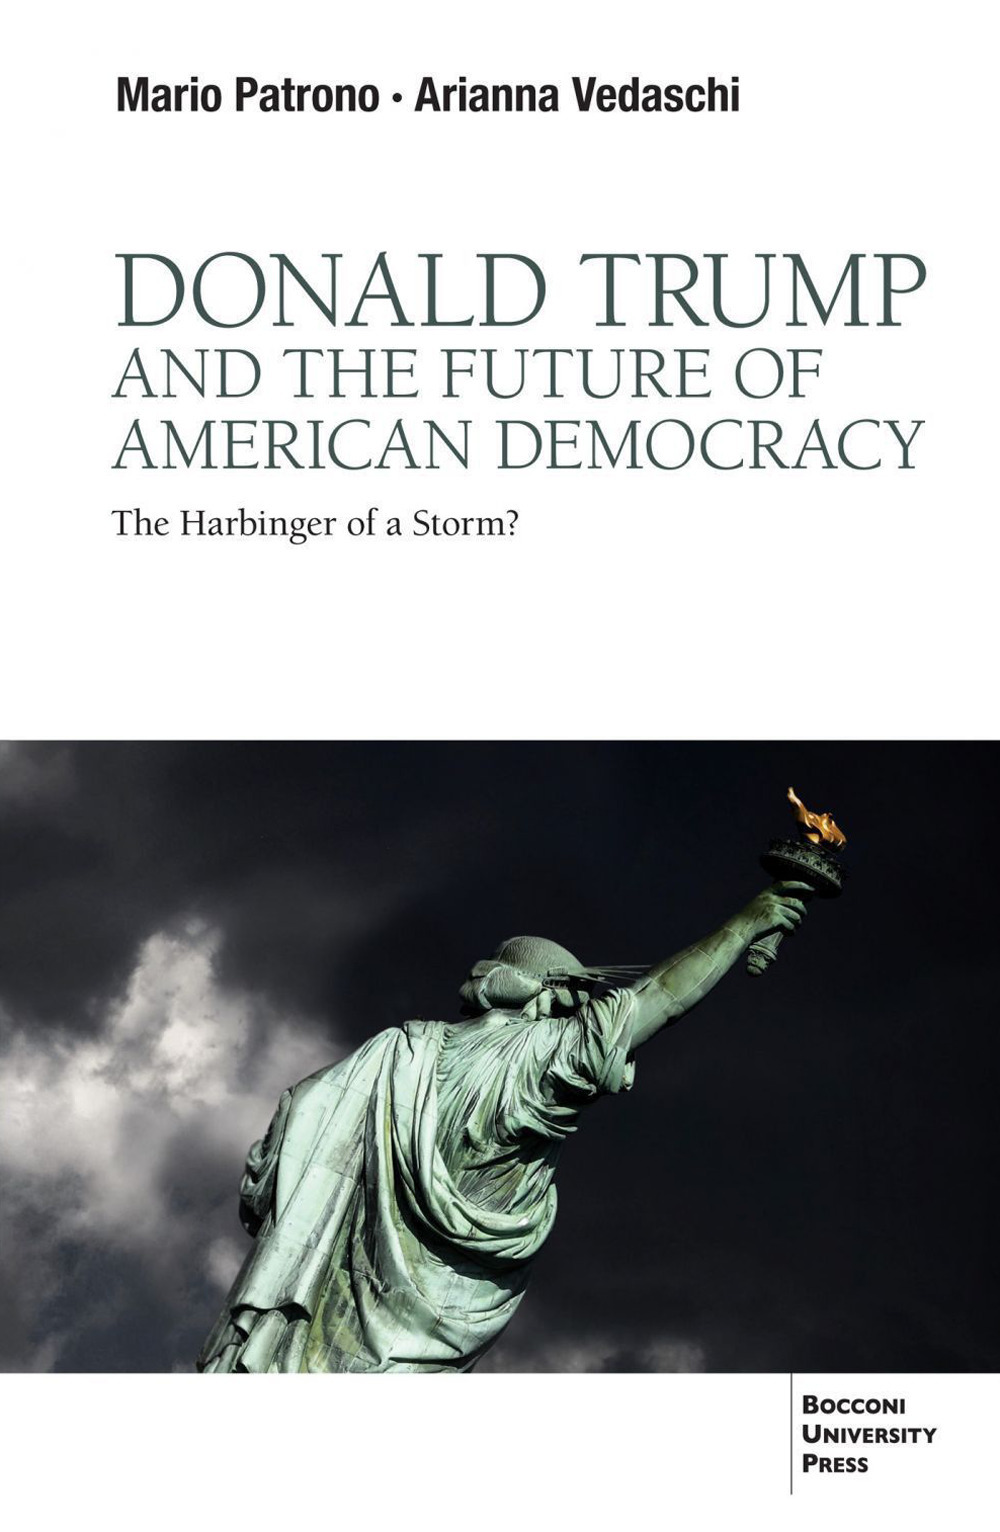 Donald Trump and the future of American democracy. The harbinger of a storm?